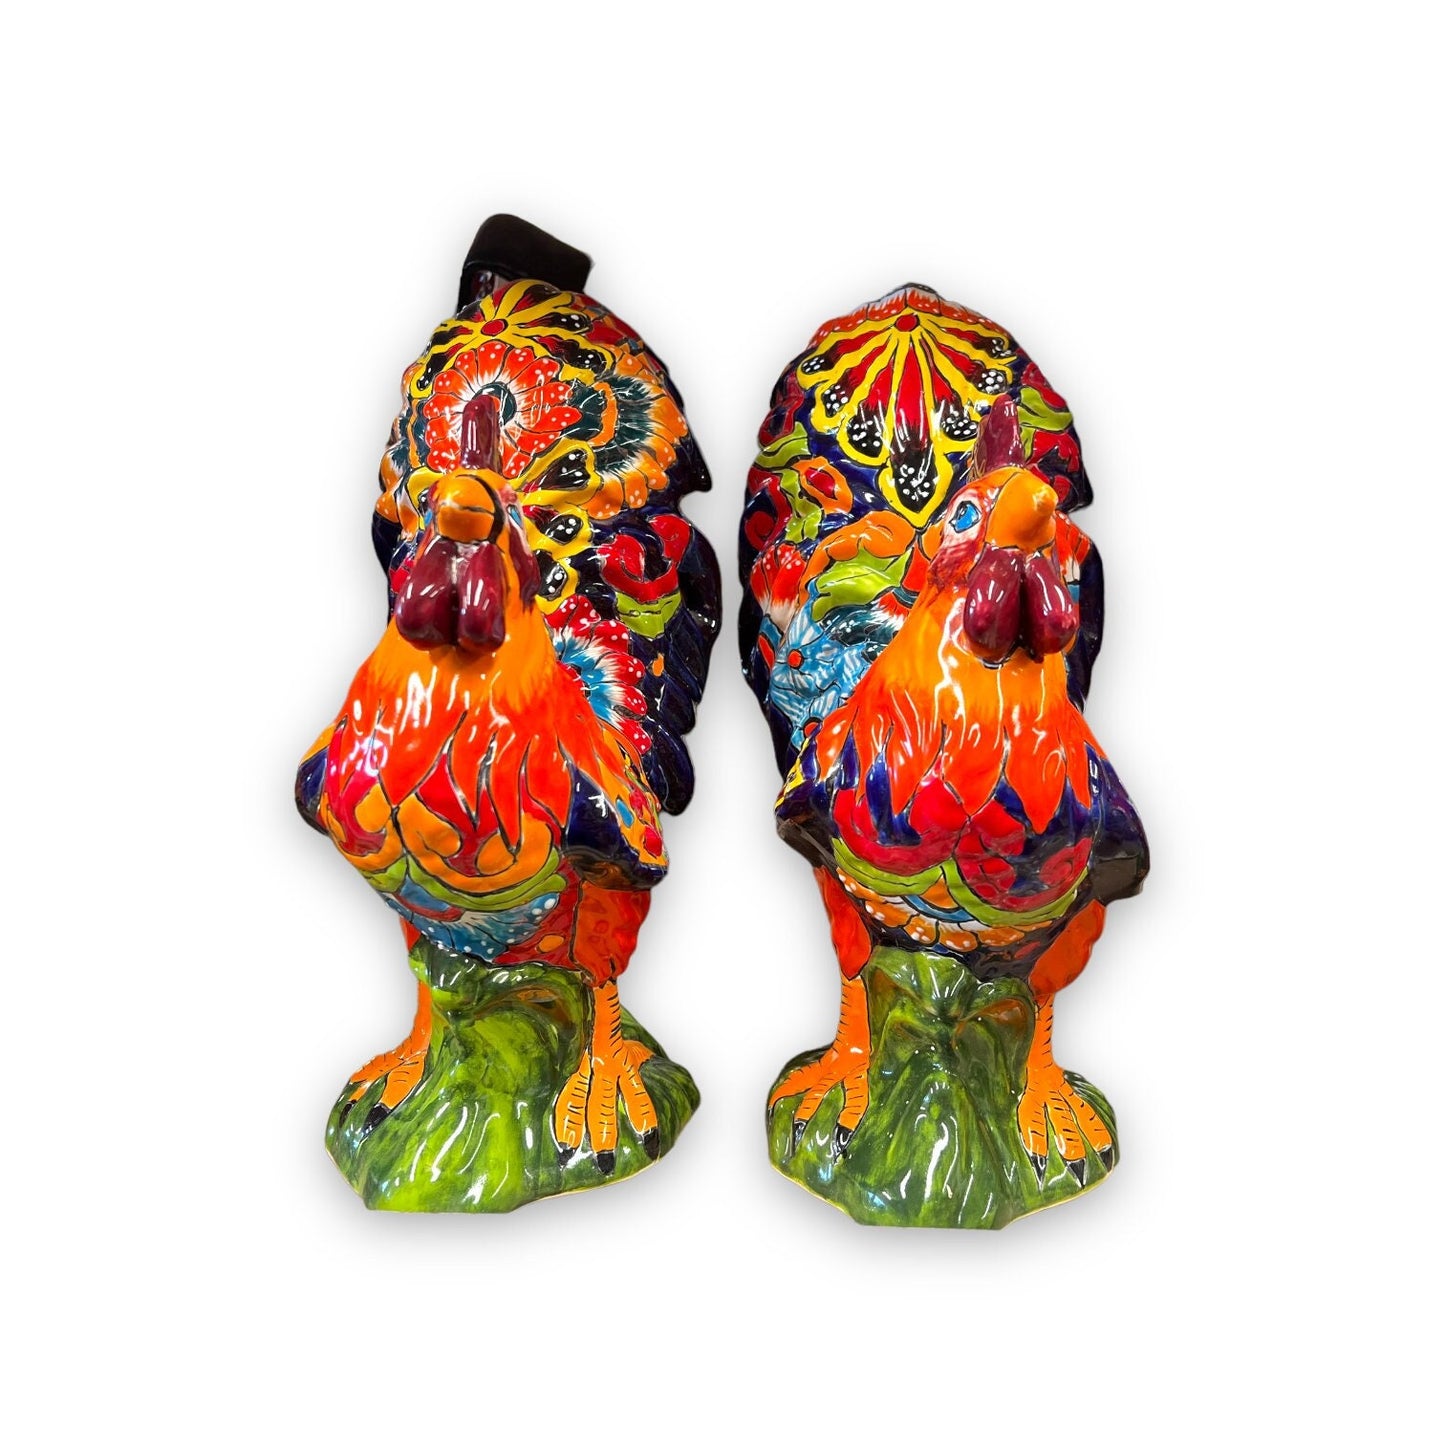 Vibrant Handmade Talavera Rooster Statue | Painted Mexican Chicken Sculpture (Large Size)